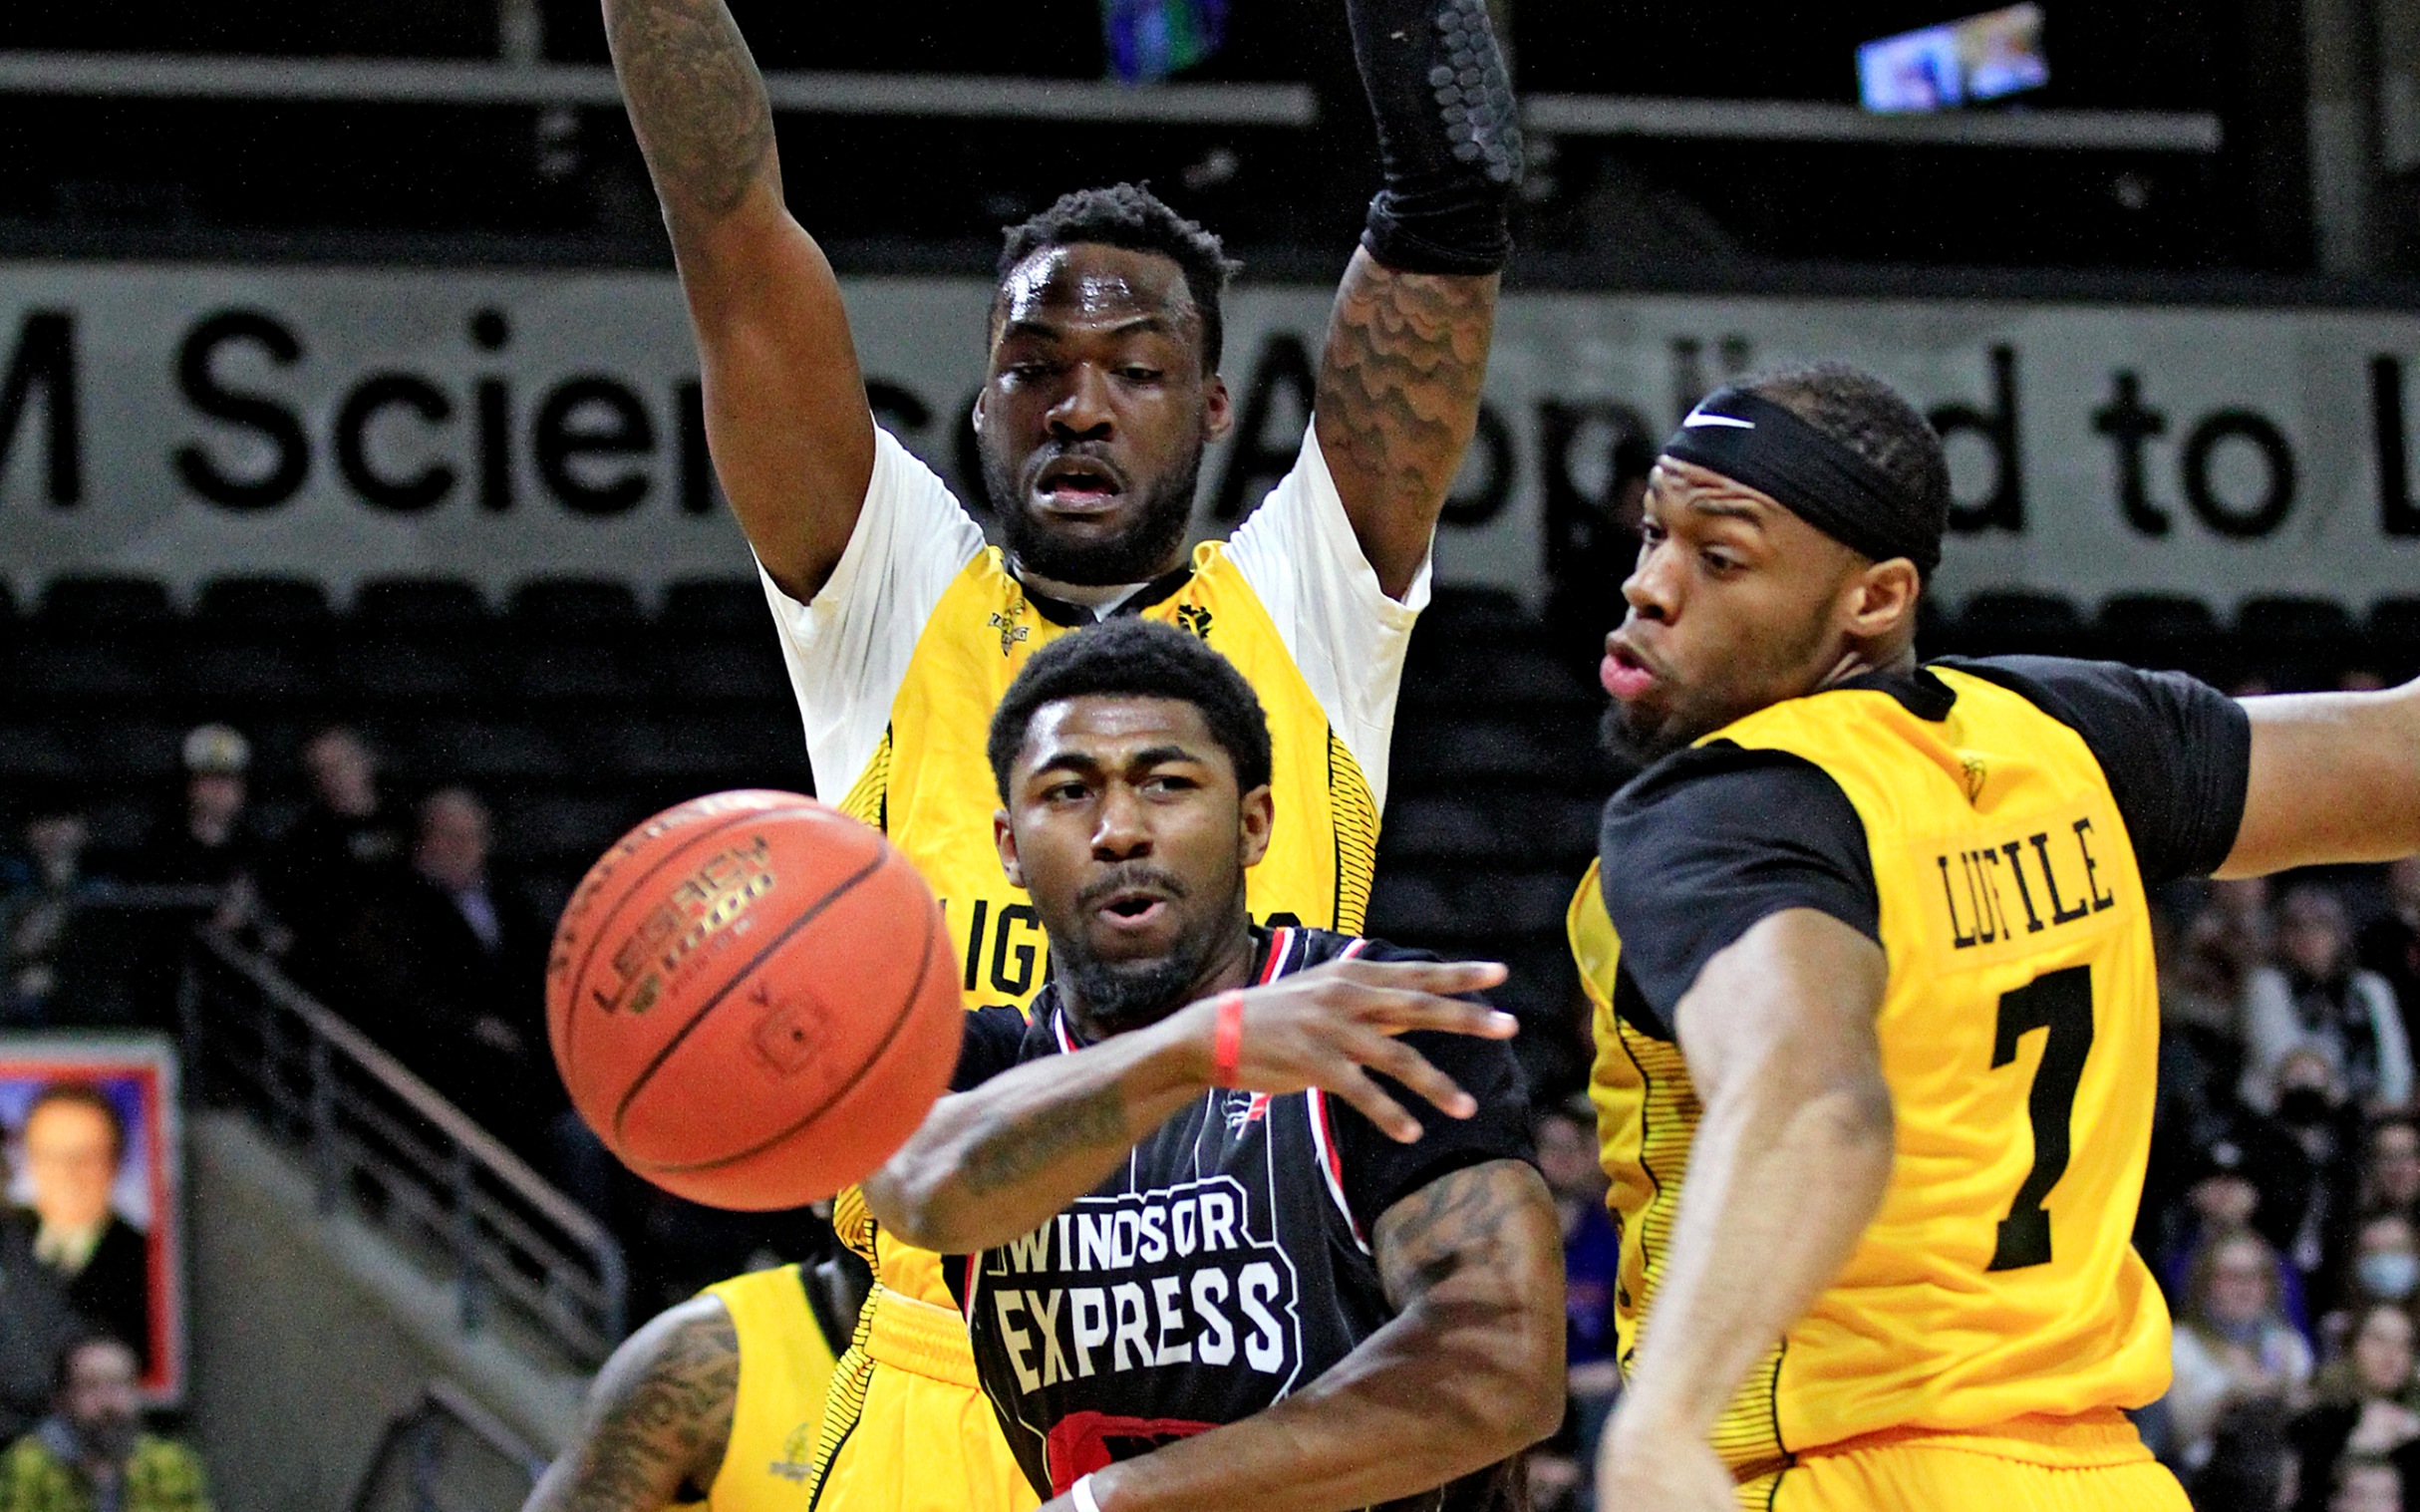 Lightning, Express Ready To Square Off in NBLC Finals